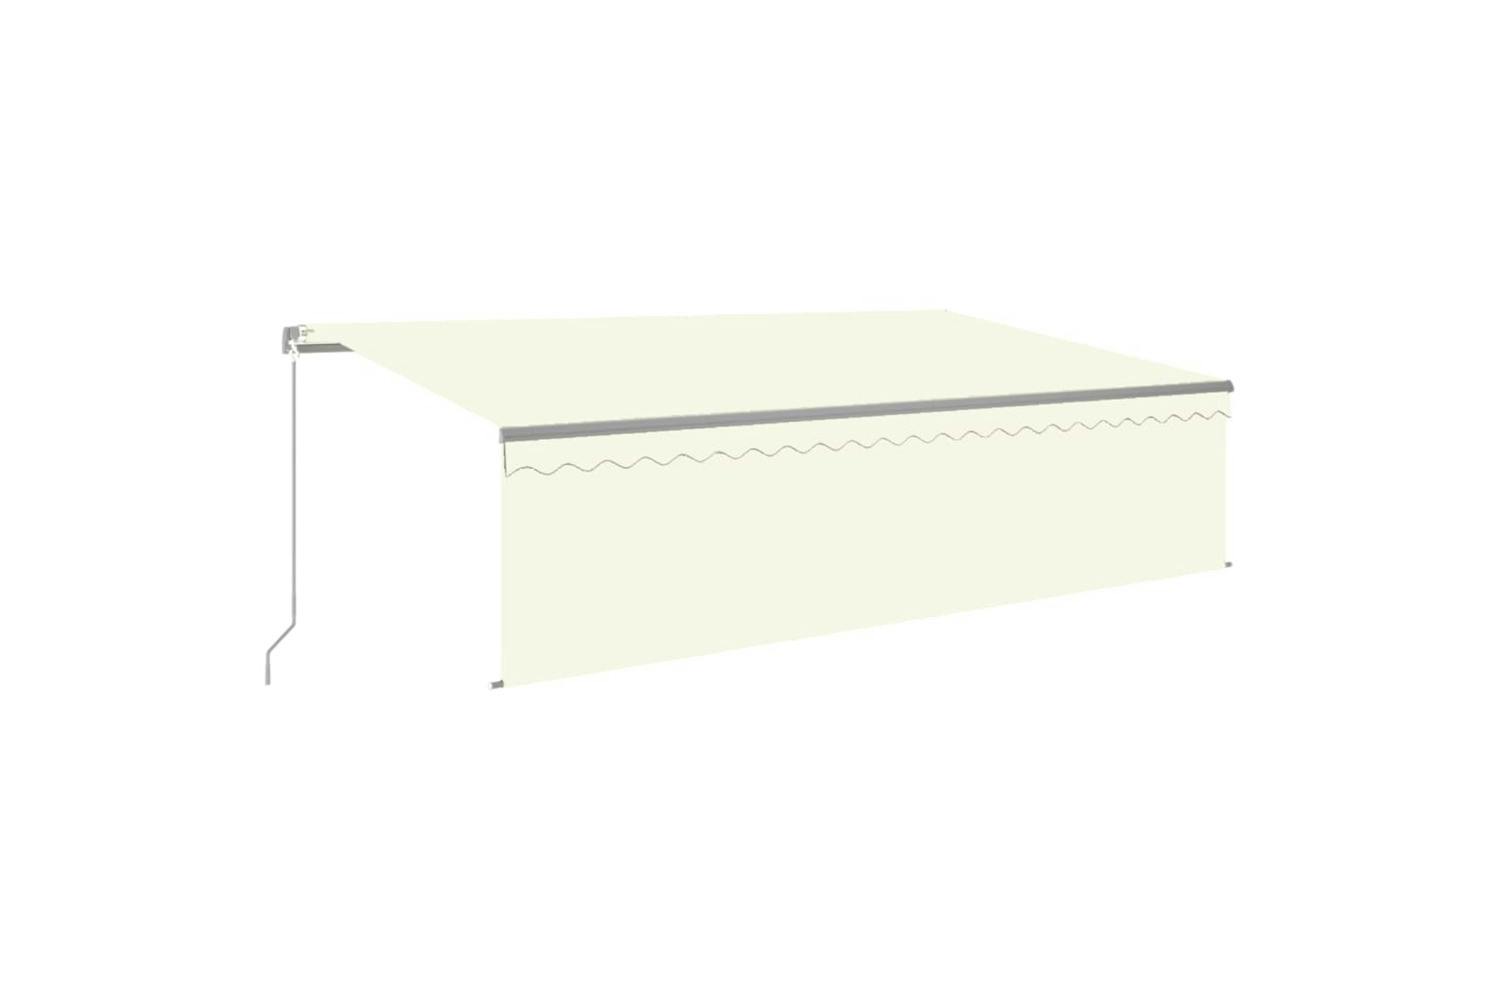 Vidaxl 3069458 Manual Retractable Awning With Blind 5x3m Yellow&white